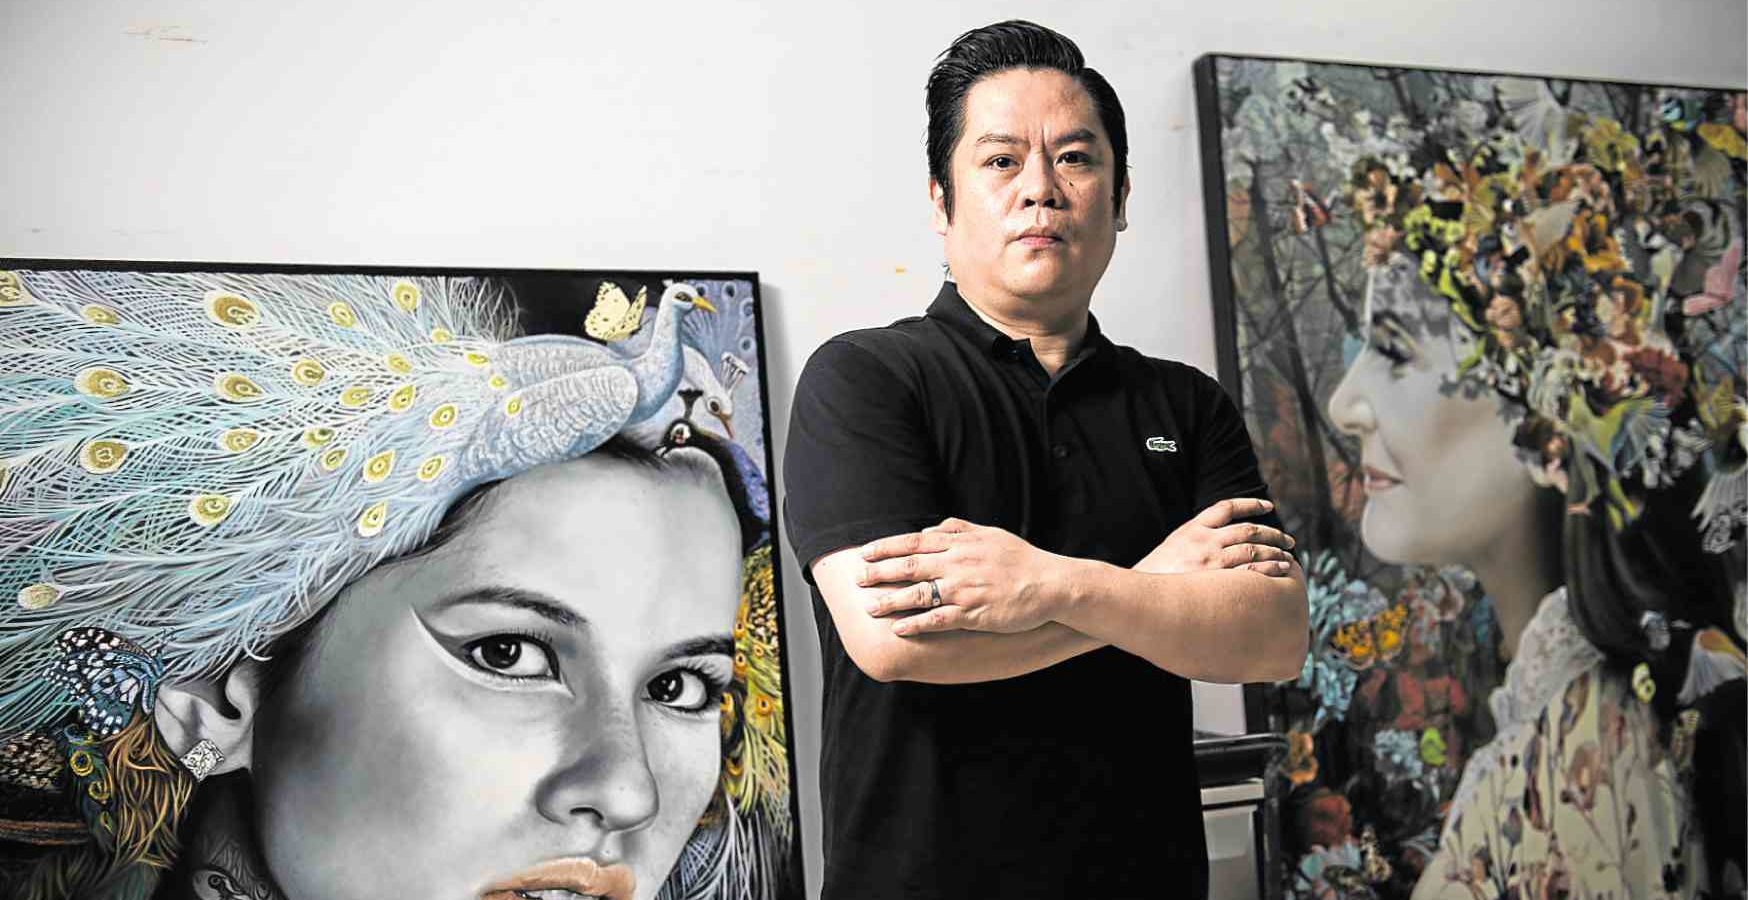 Andres Barrioquinto exhibit at National Museum aims to raise funds for ACC.